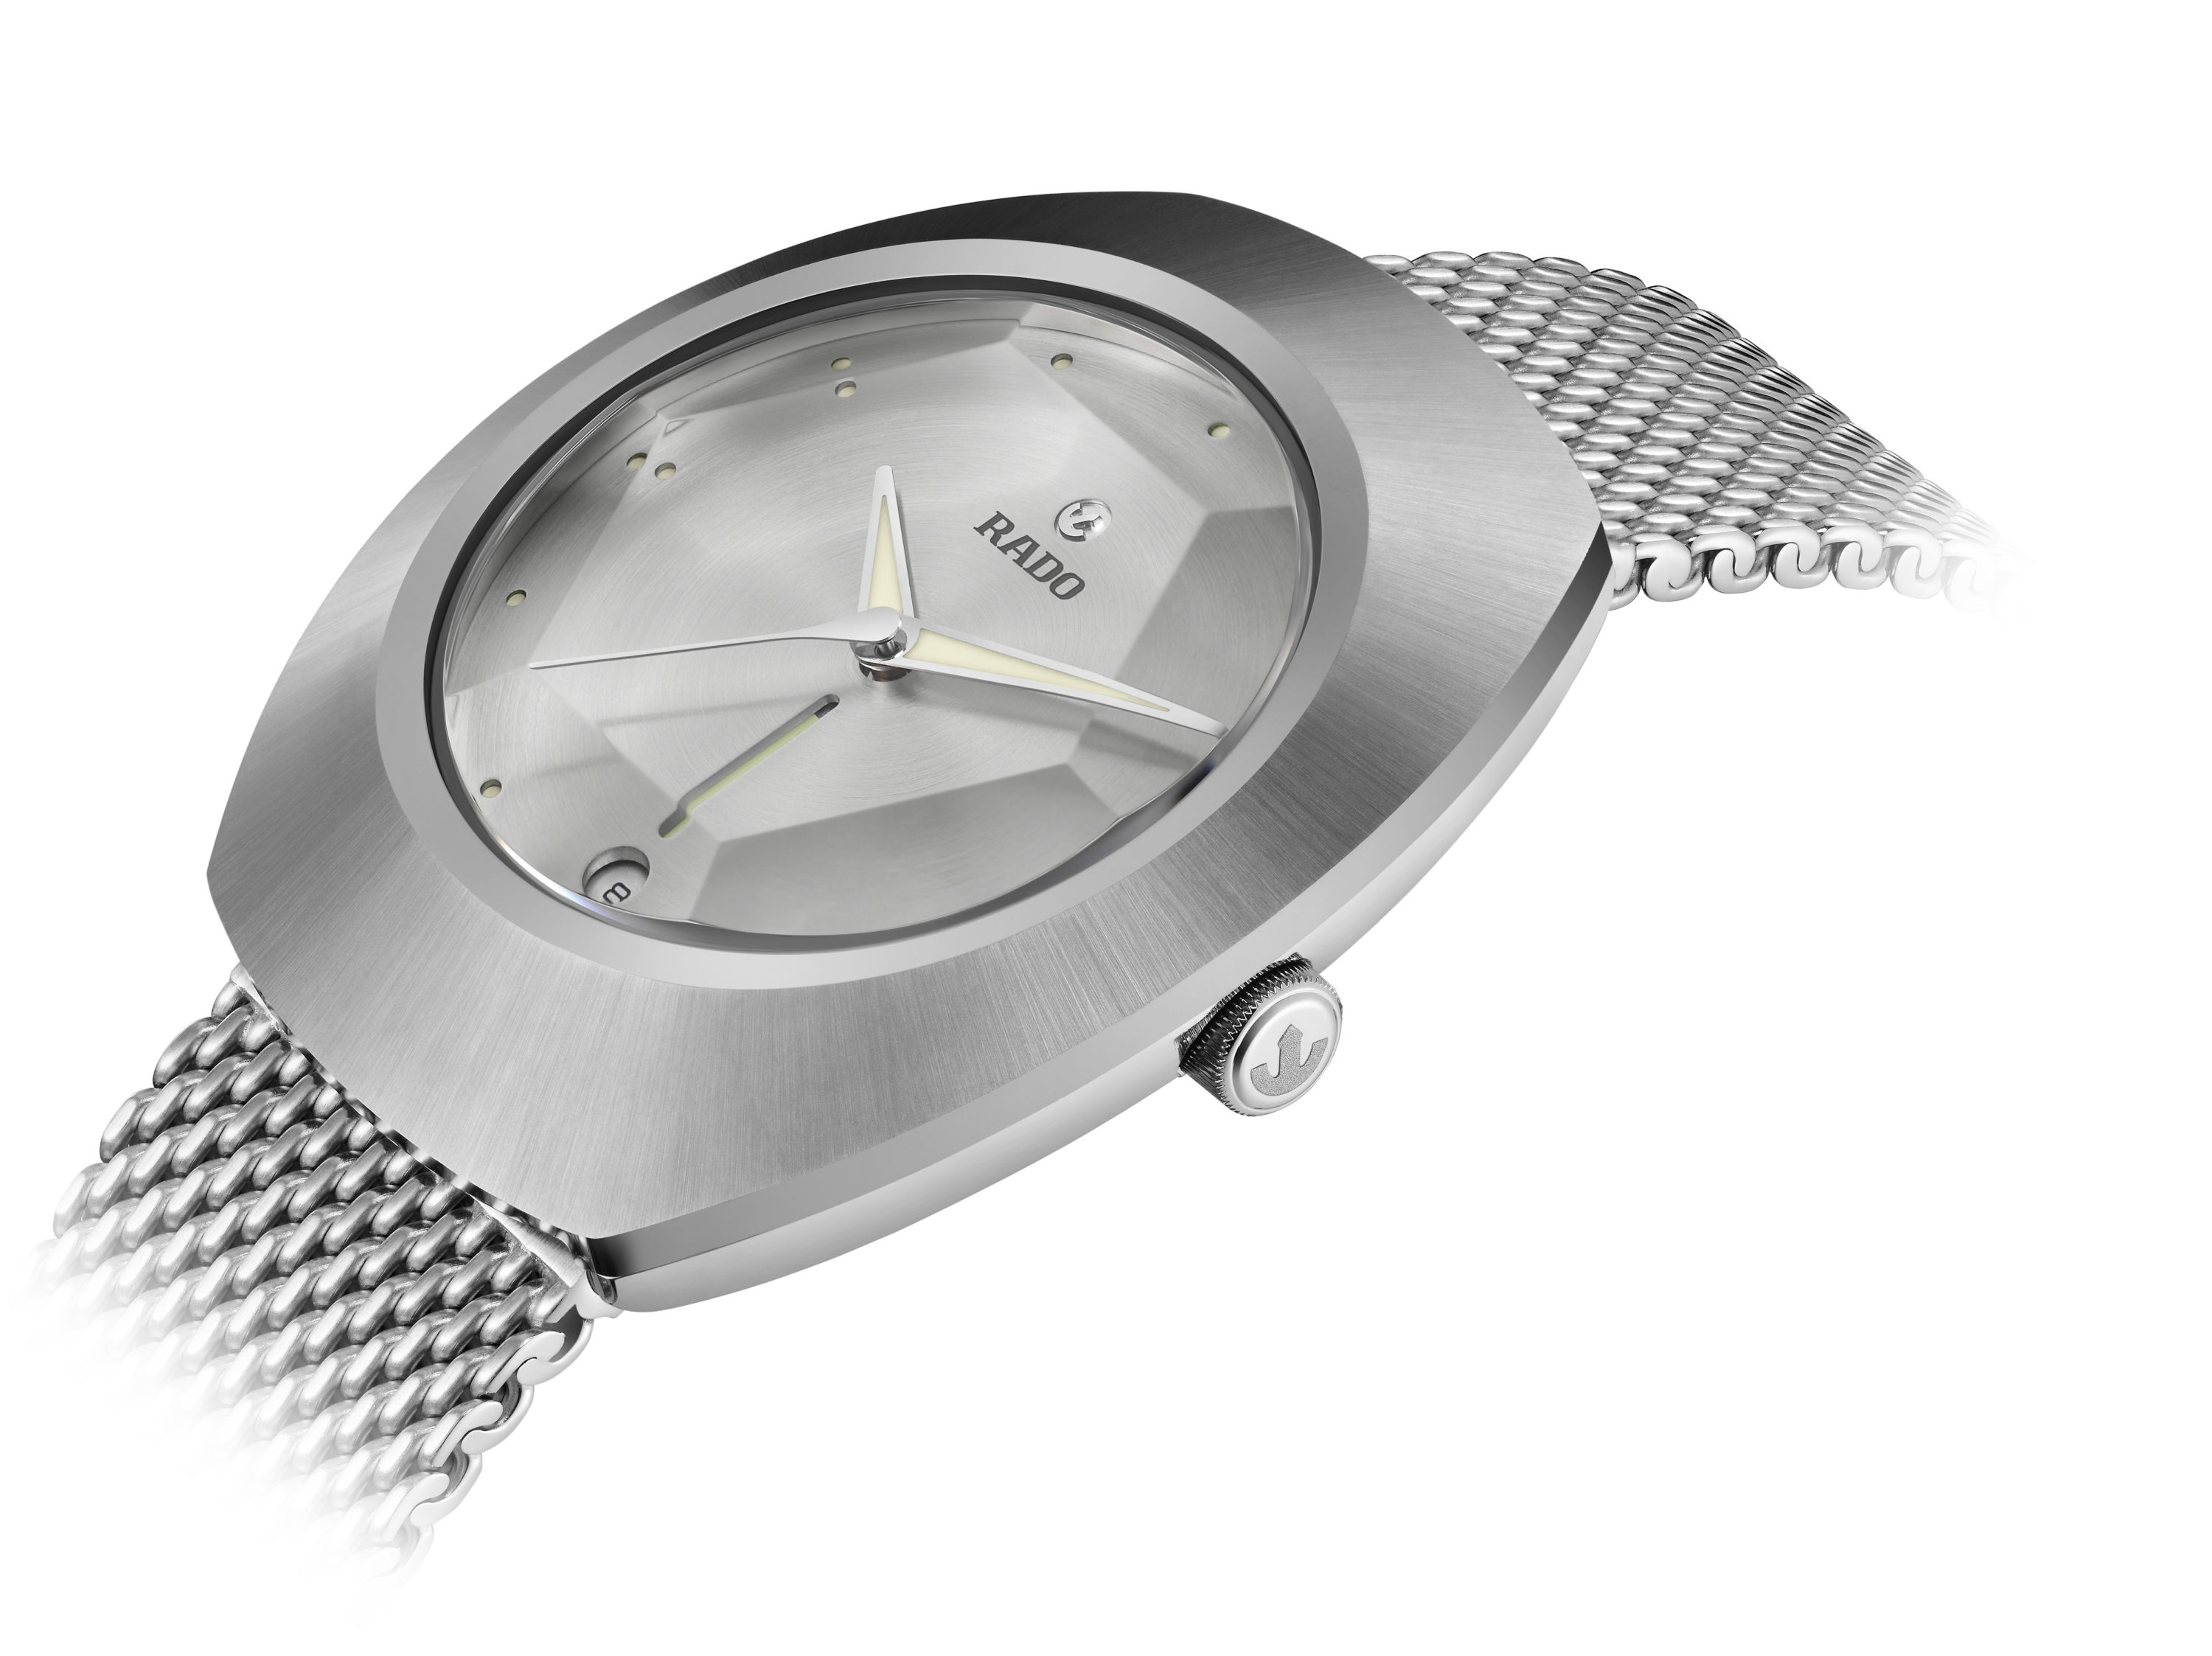 Rado Integral Jublie Ladies Watch | First State Auctions Hong Kong